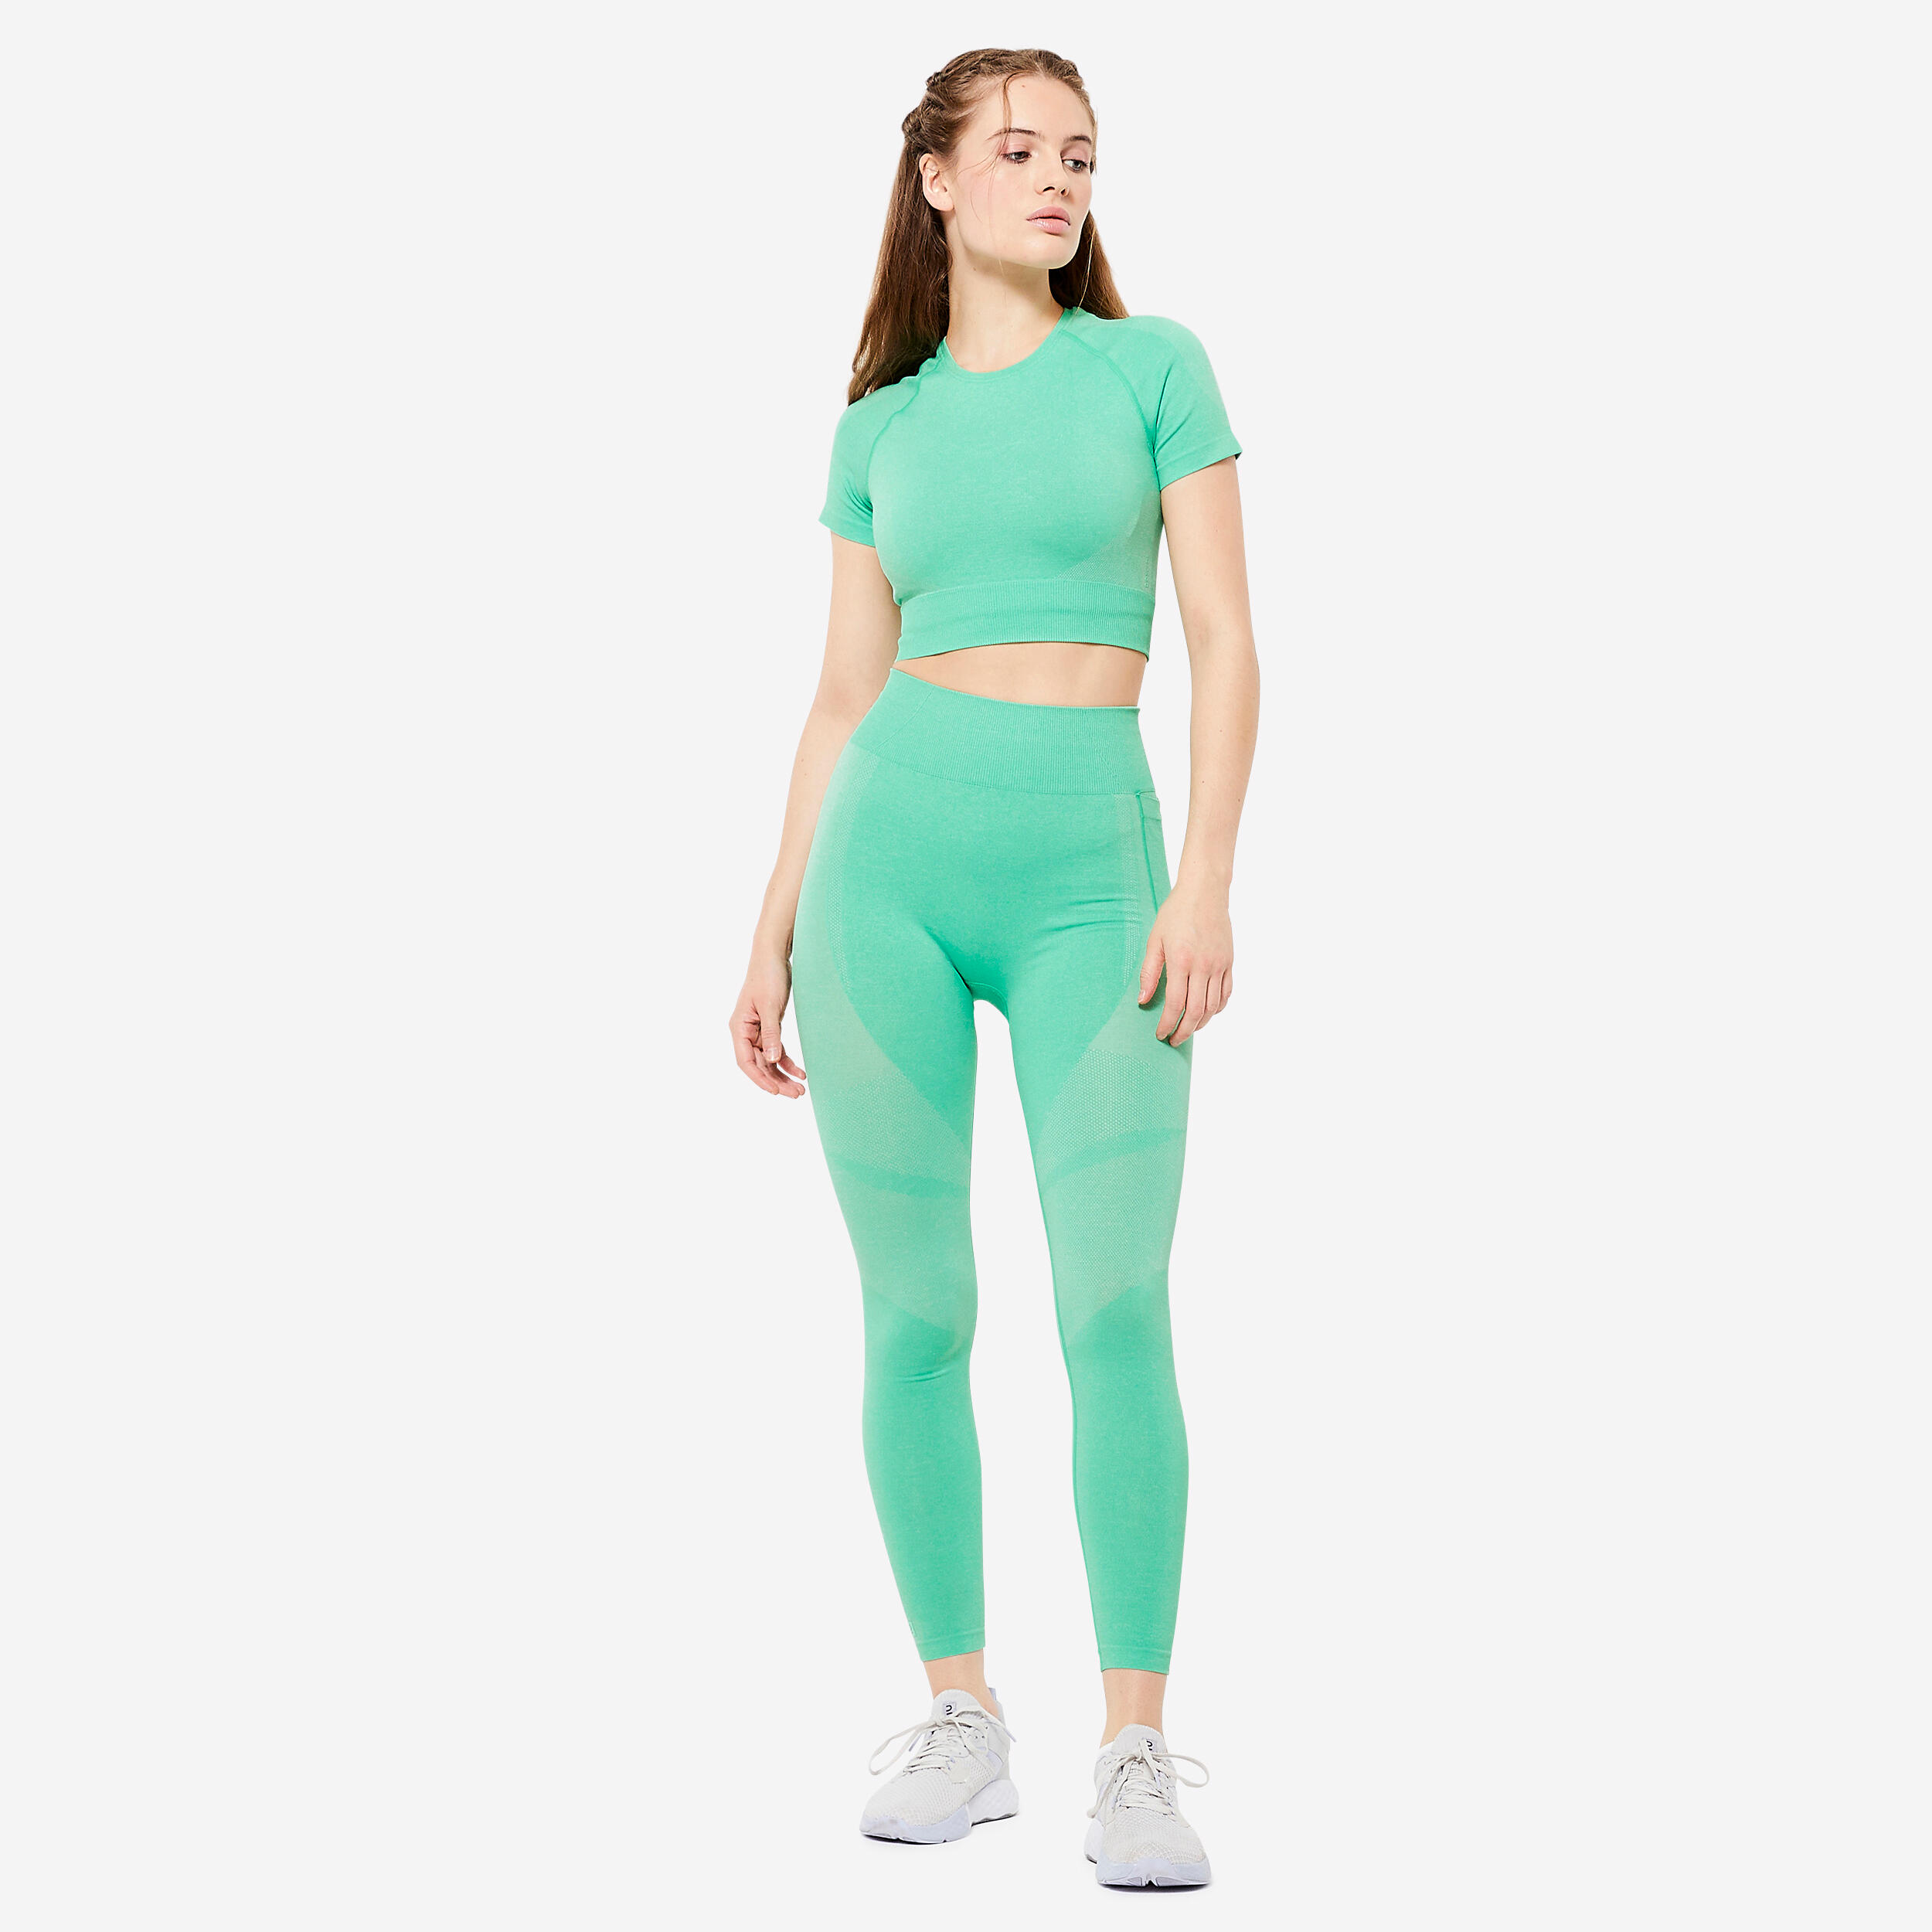 High-Waisted Seamless Fitness Leggings with Phone Pocket - Green 2/6